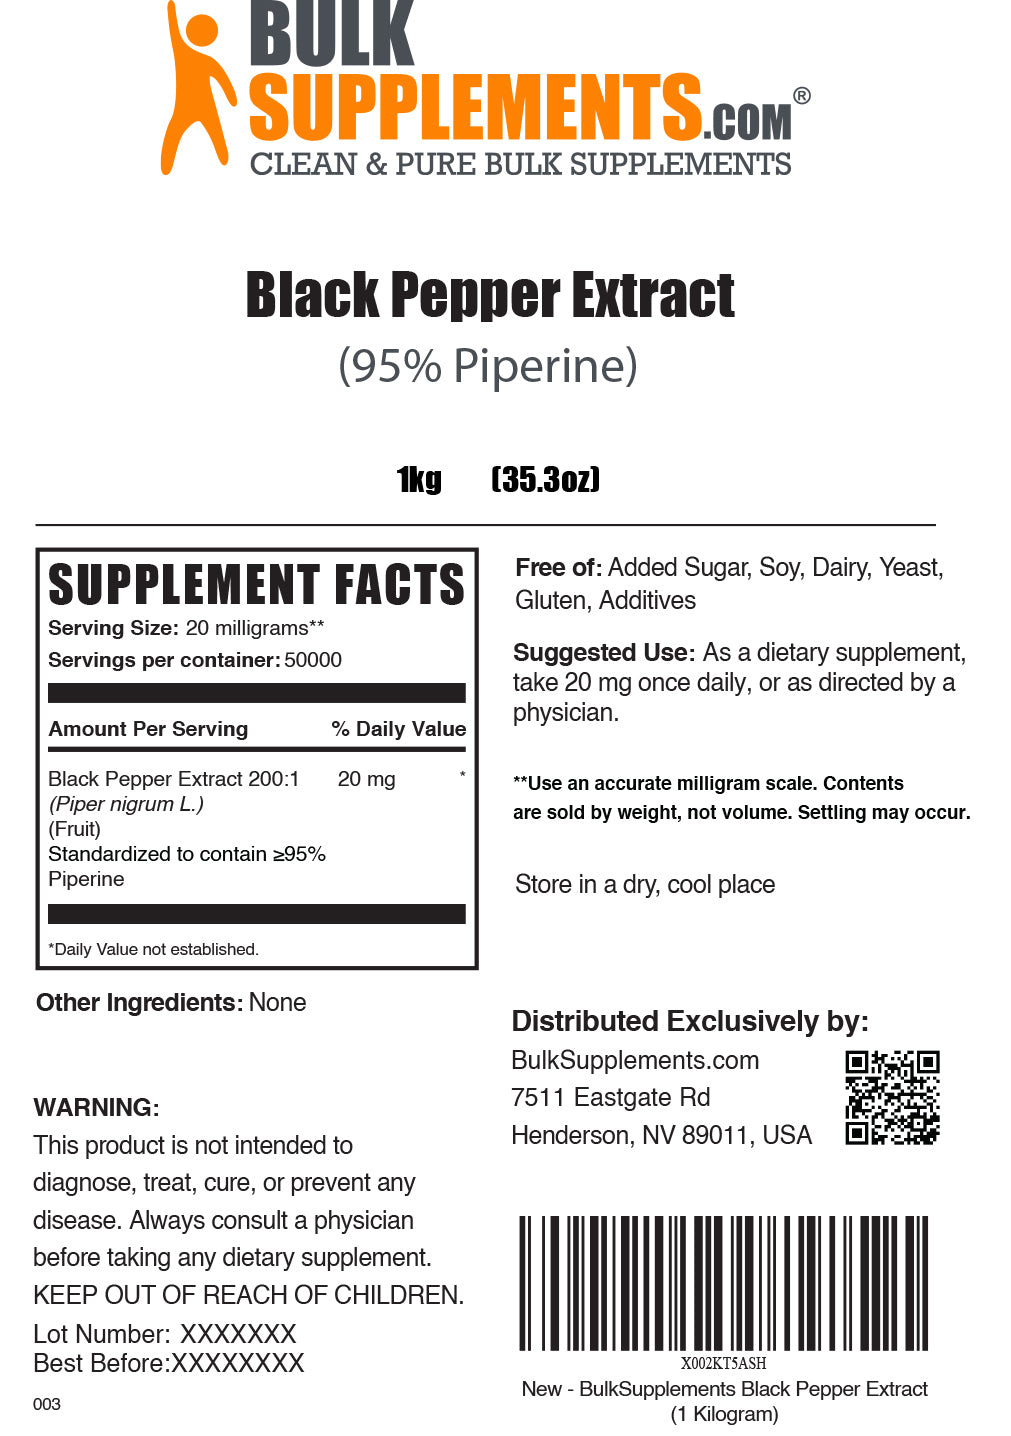 1kg black pepper extract supplement facts